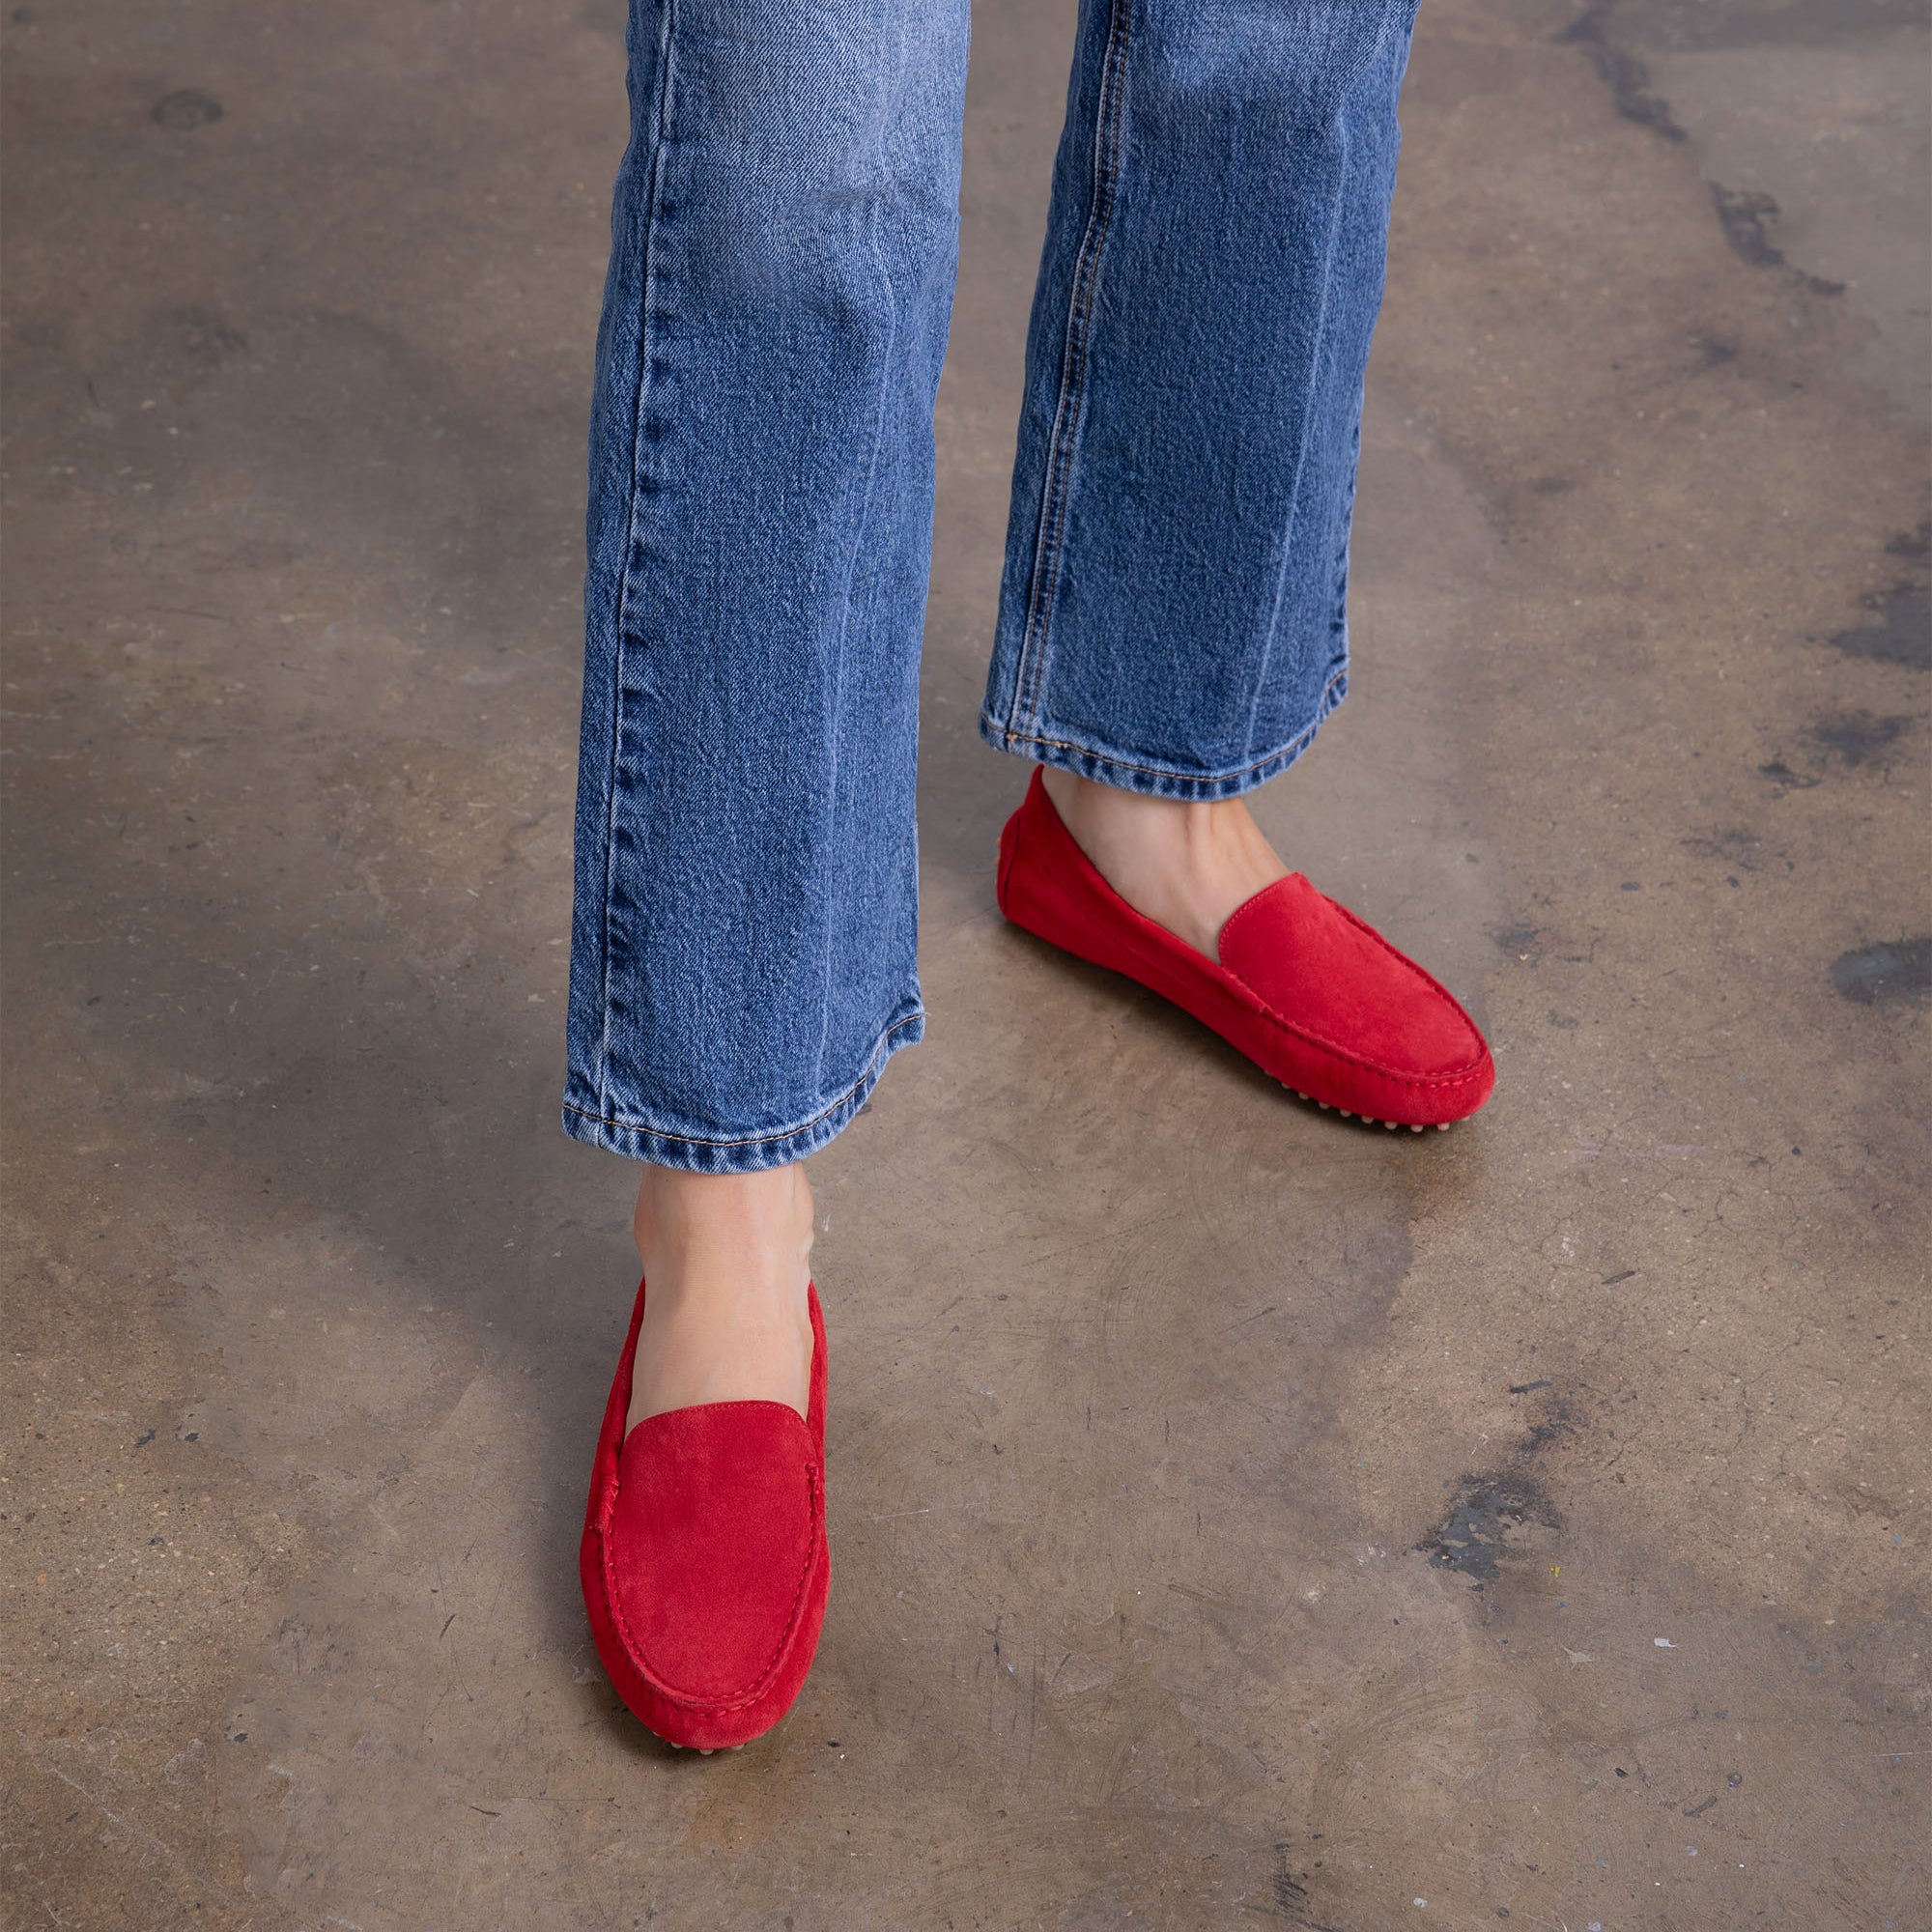 15 Chunky Loafer Looks You'll Love to Wear - Be So You